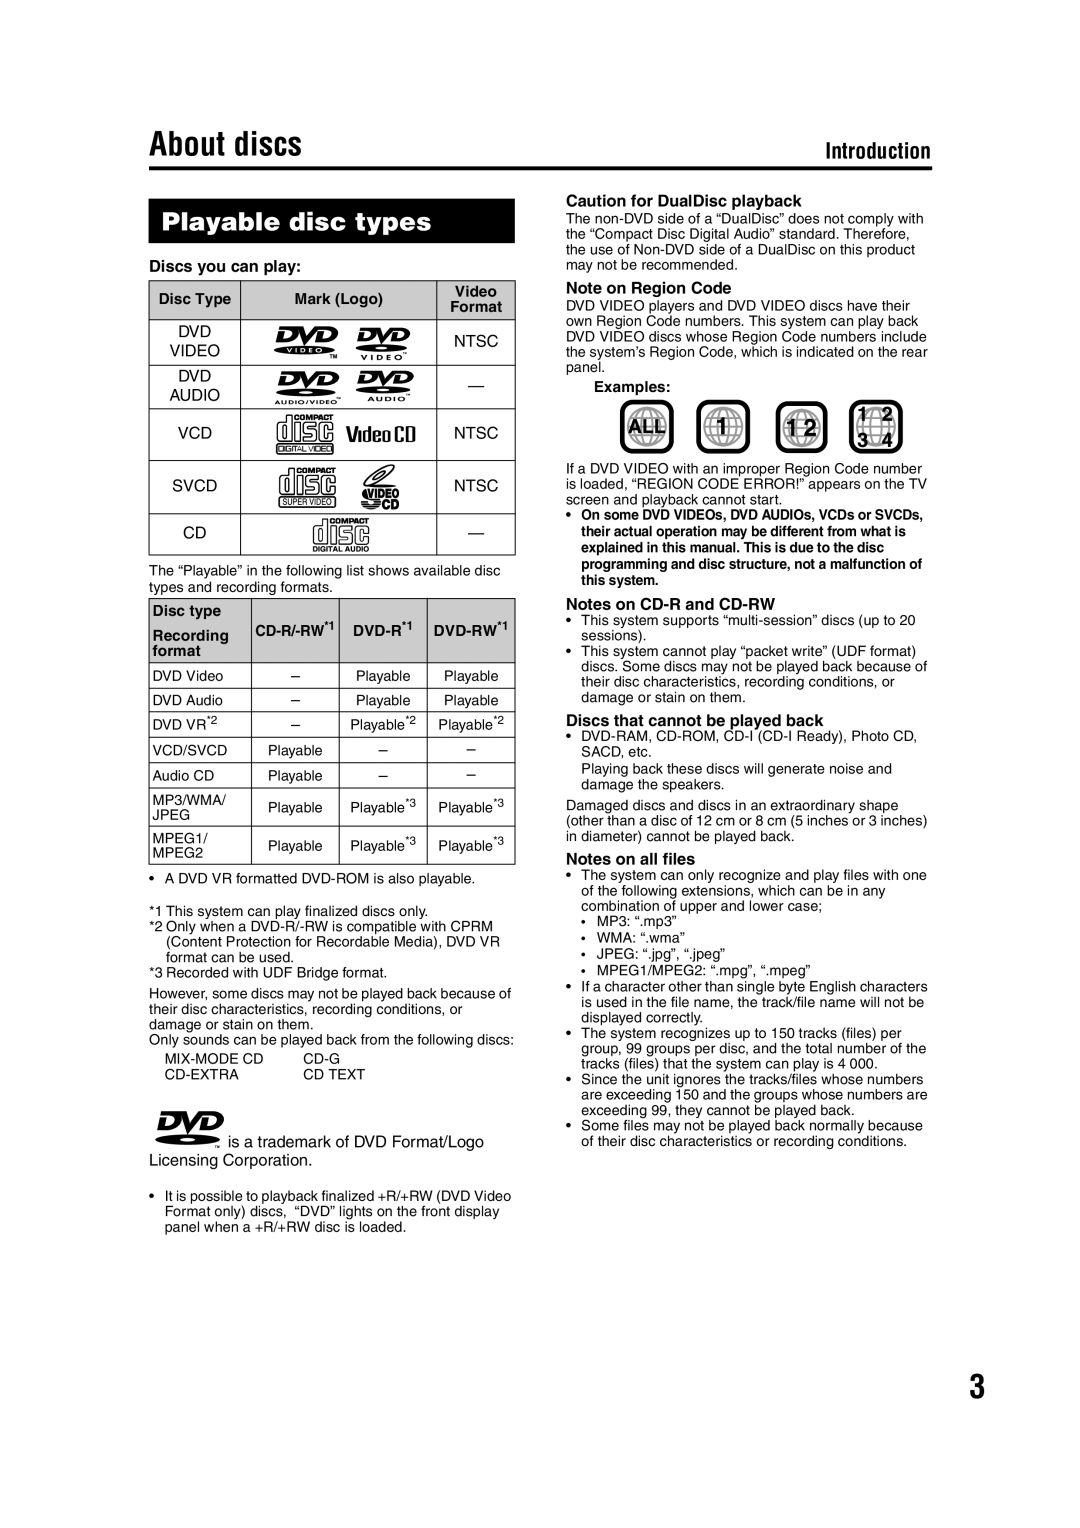 JVC EX-D11 manual About discs, Playable disc types, Introduction, Discs you can play, Caution for DualDisc playback 